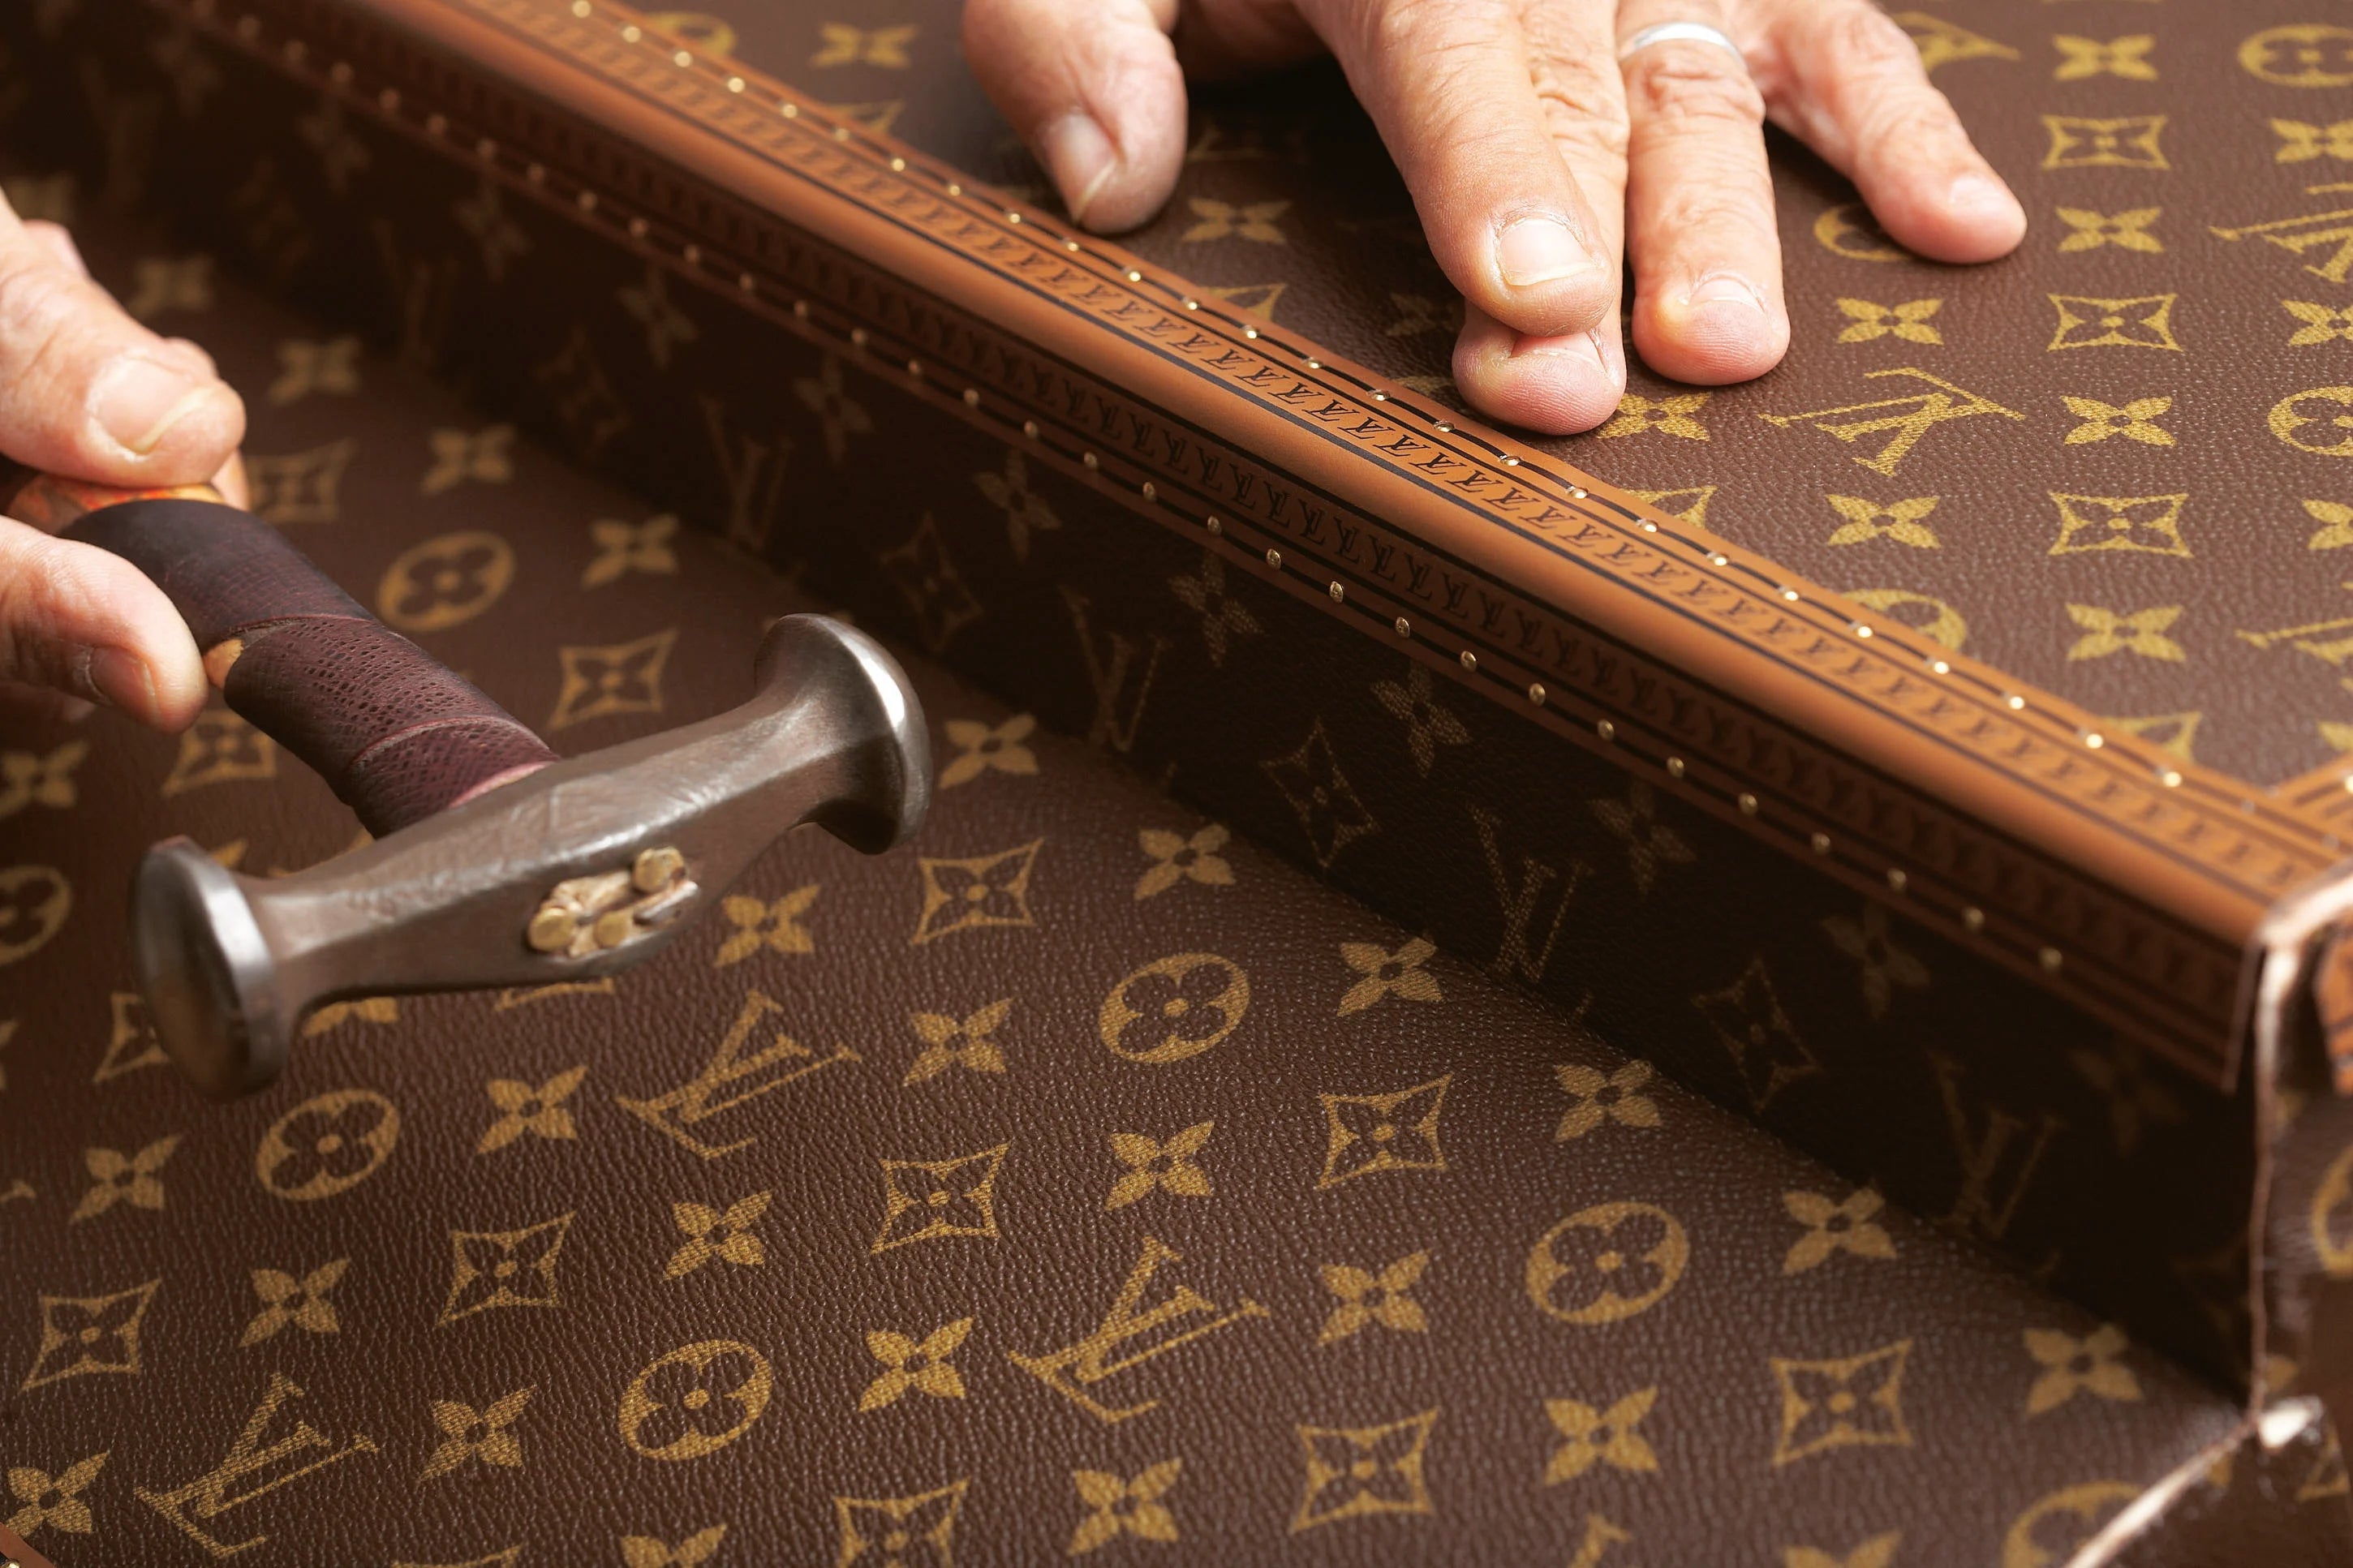  100 Legendary Louis Vuitton Trunks (Chinese Edition